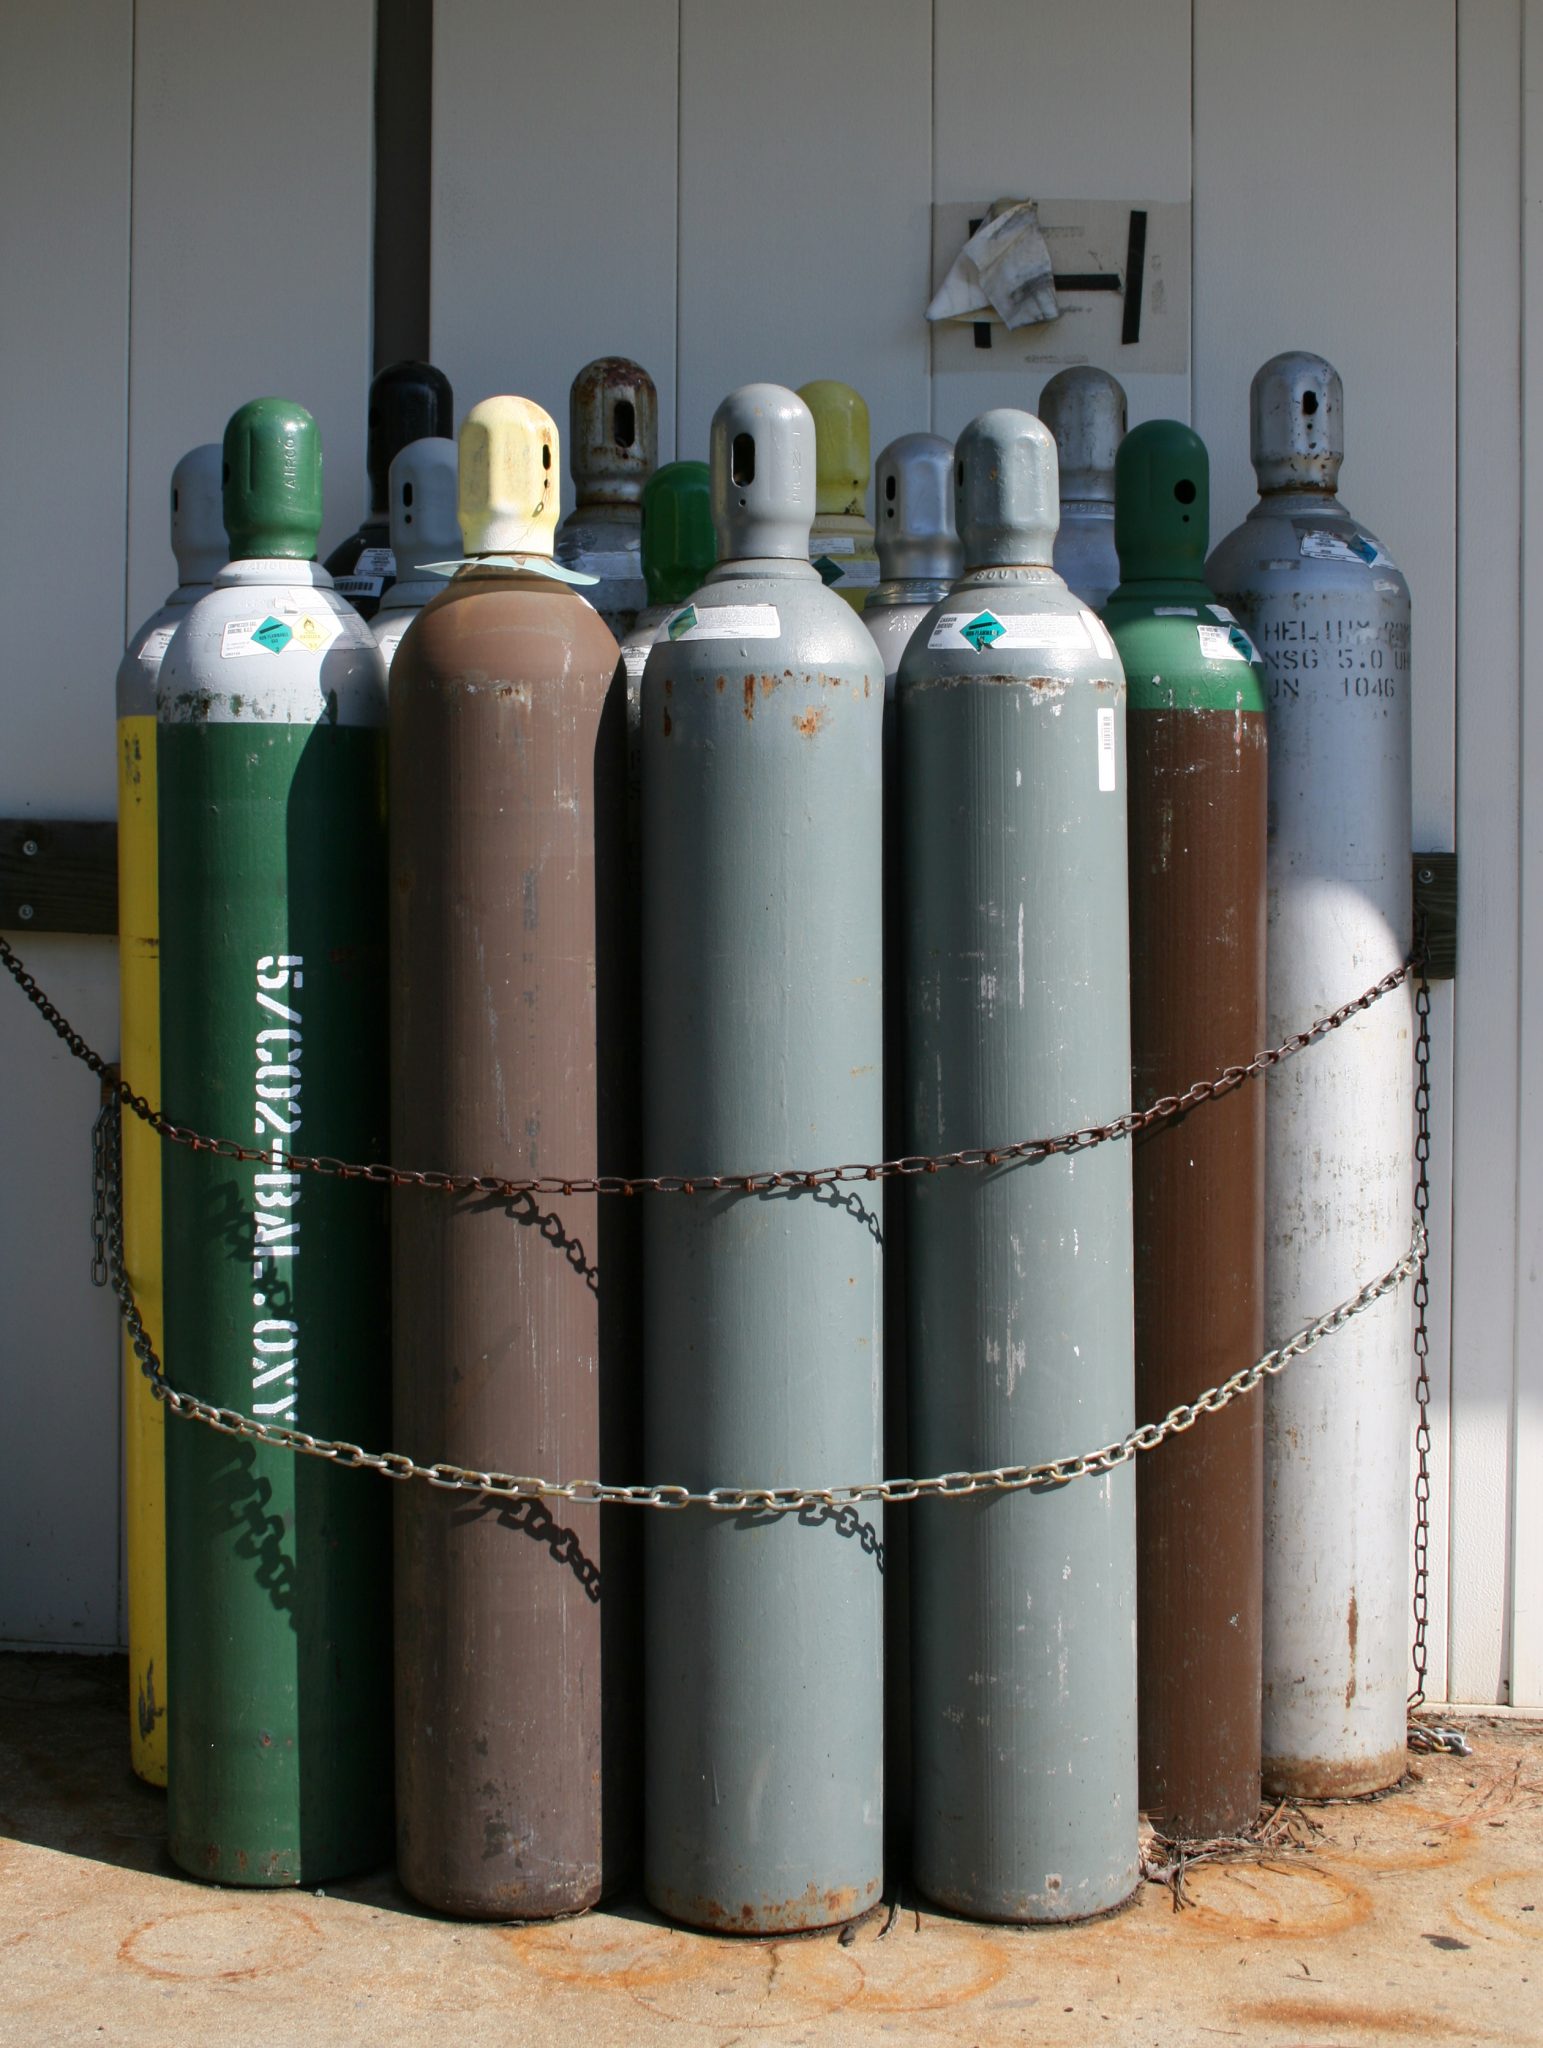 Compressed gas cylinders double chained to an exterior wall